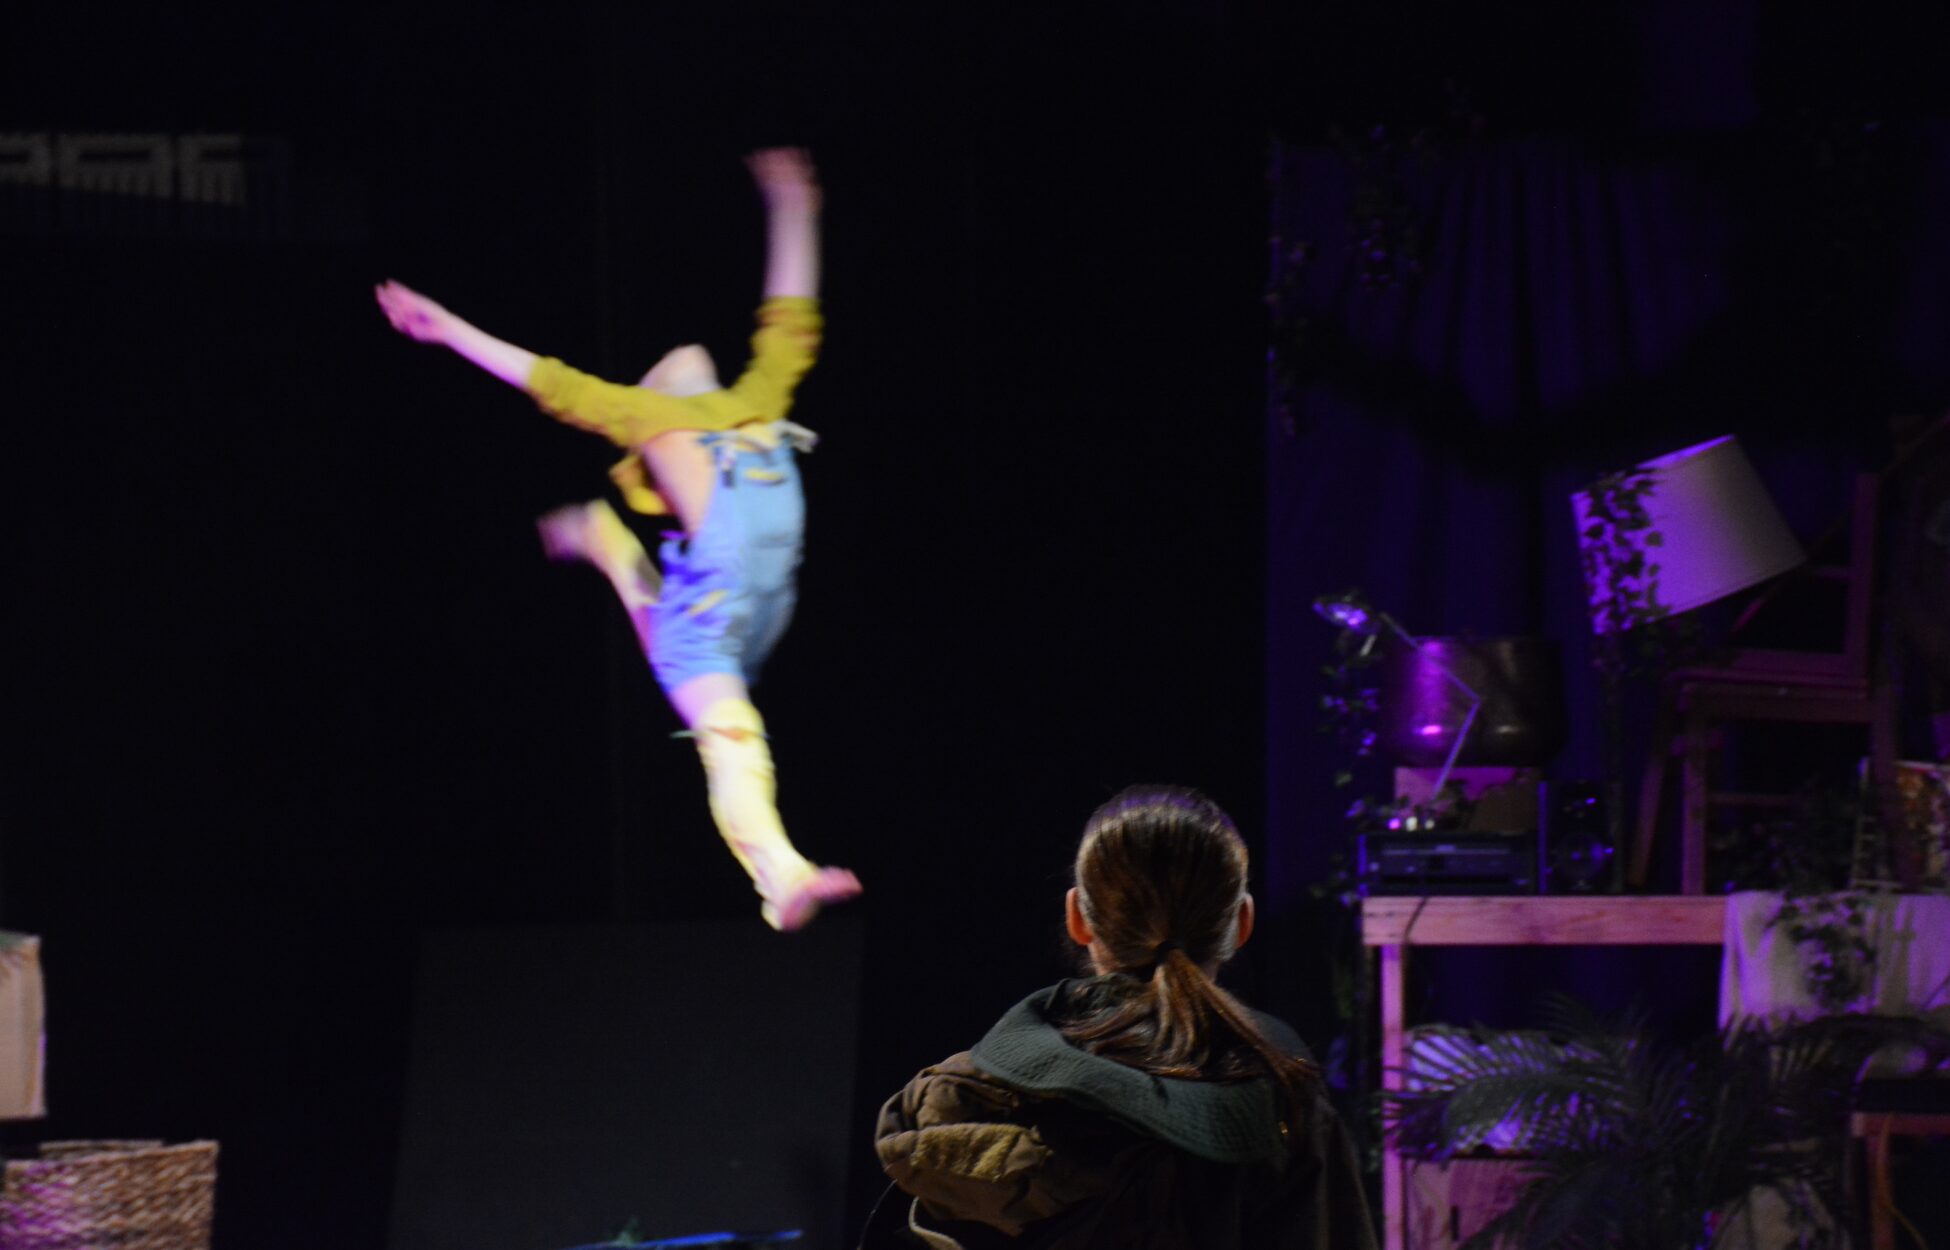 Circus Center Presents the World Premiere of “JUMP//FALL” by the San Francisco Youth Circus